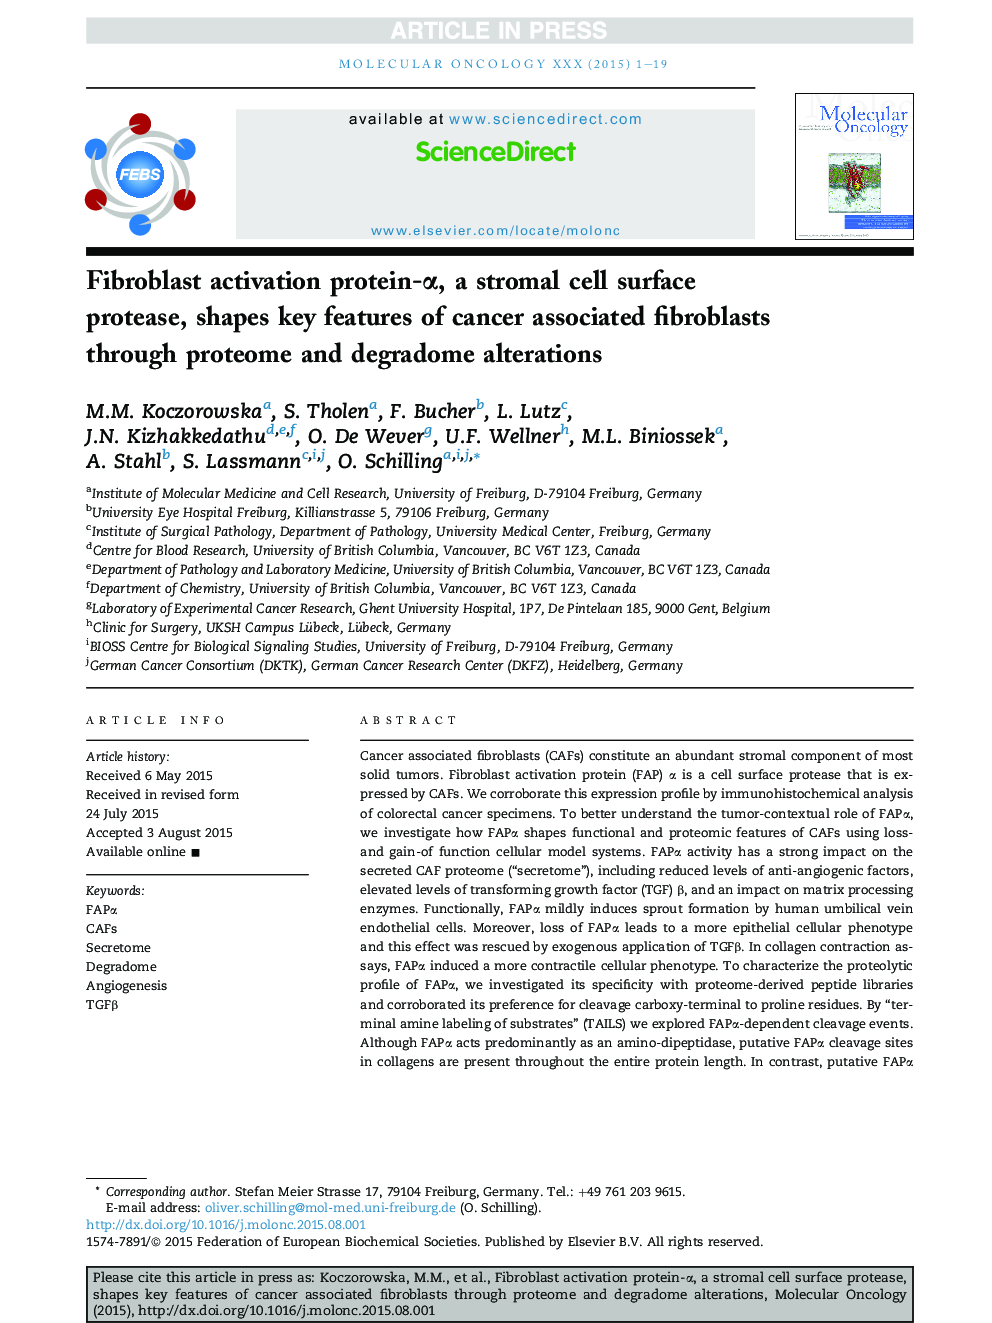 Fibroblast activation protein-Î±, a stromal cell surface protease, shapes key features of cancer associated fibroblasts through proteome and degradome alterations